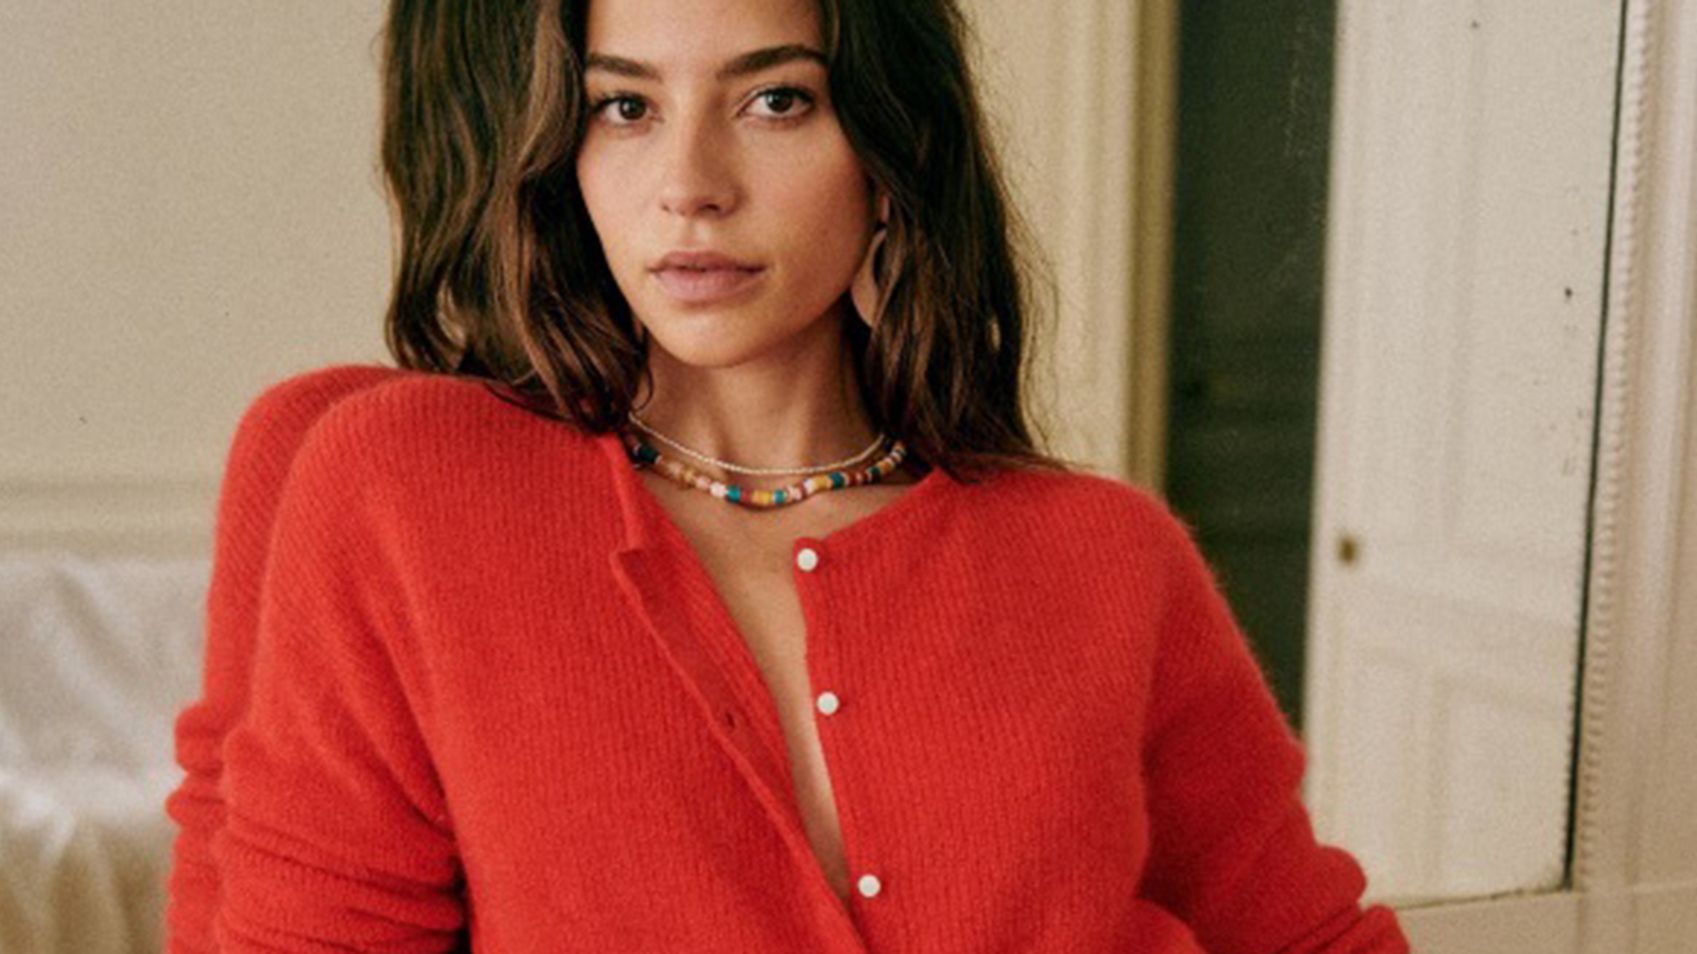 17 cozy sweaters great for lounging